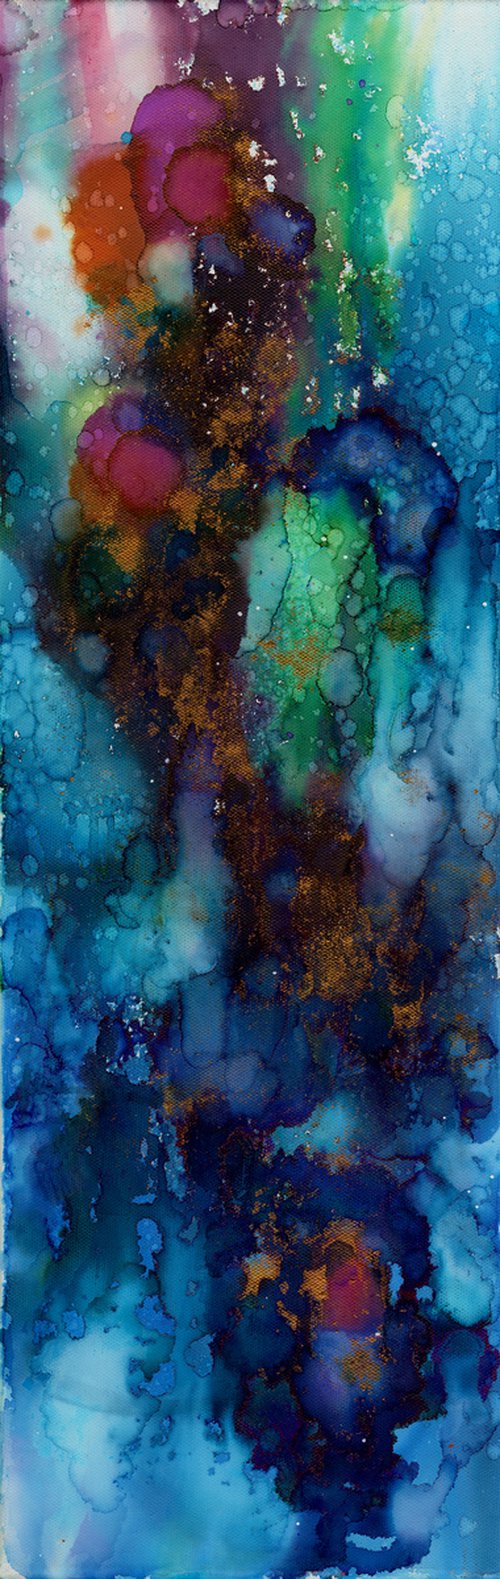 A Mystic Encounter 17 - Zen Abstract Painting by Kathy Morton Stanion by Kathy Morton Stanion